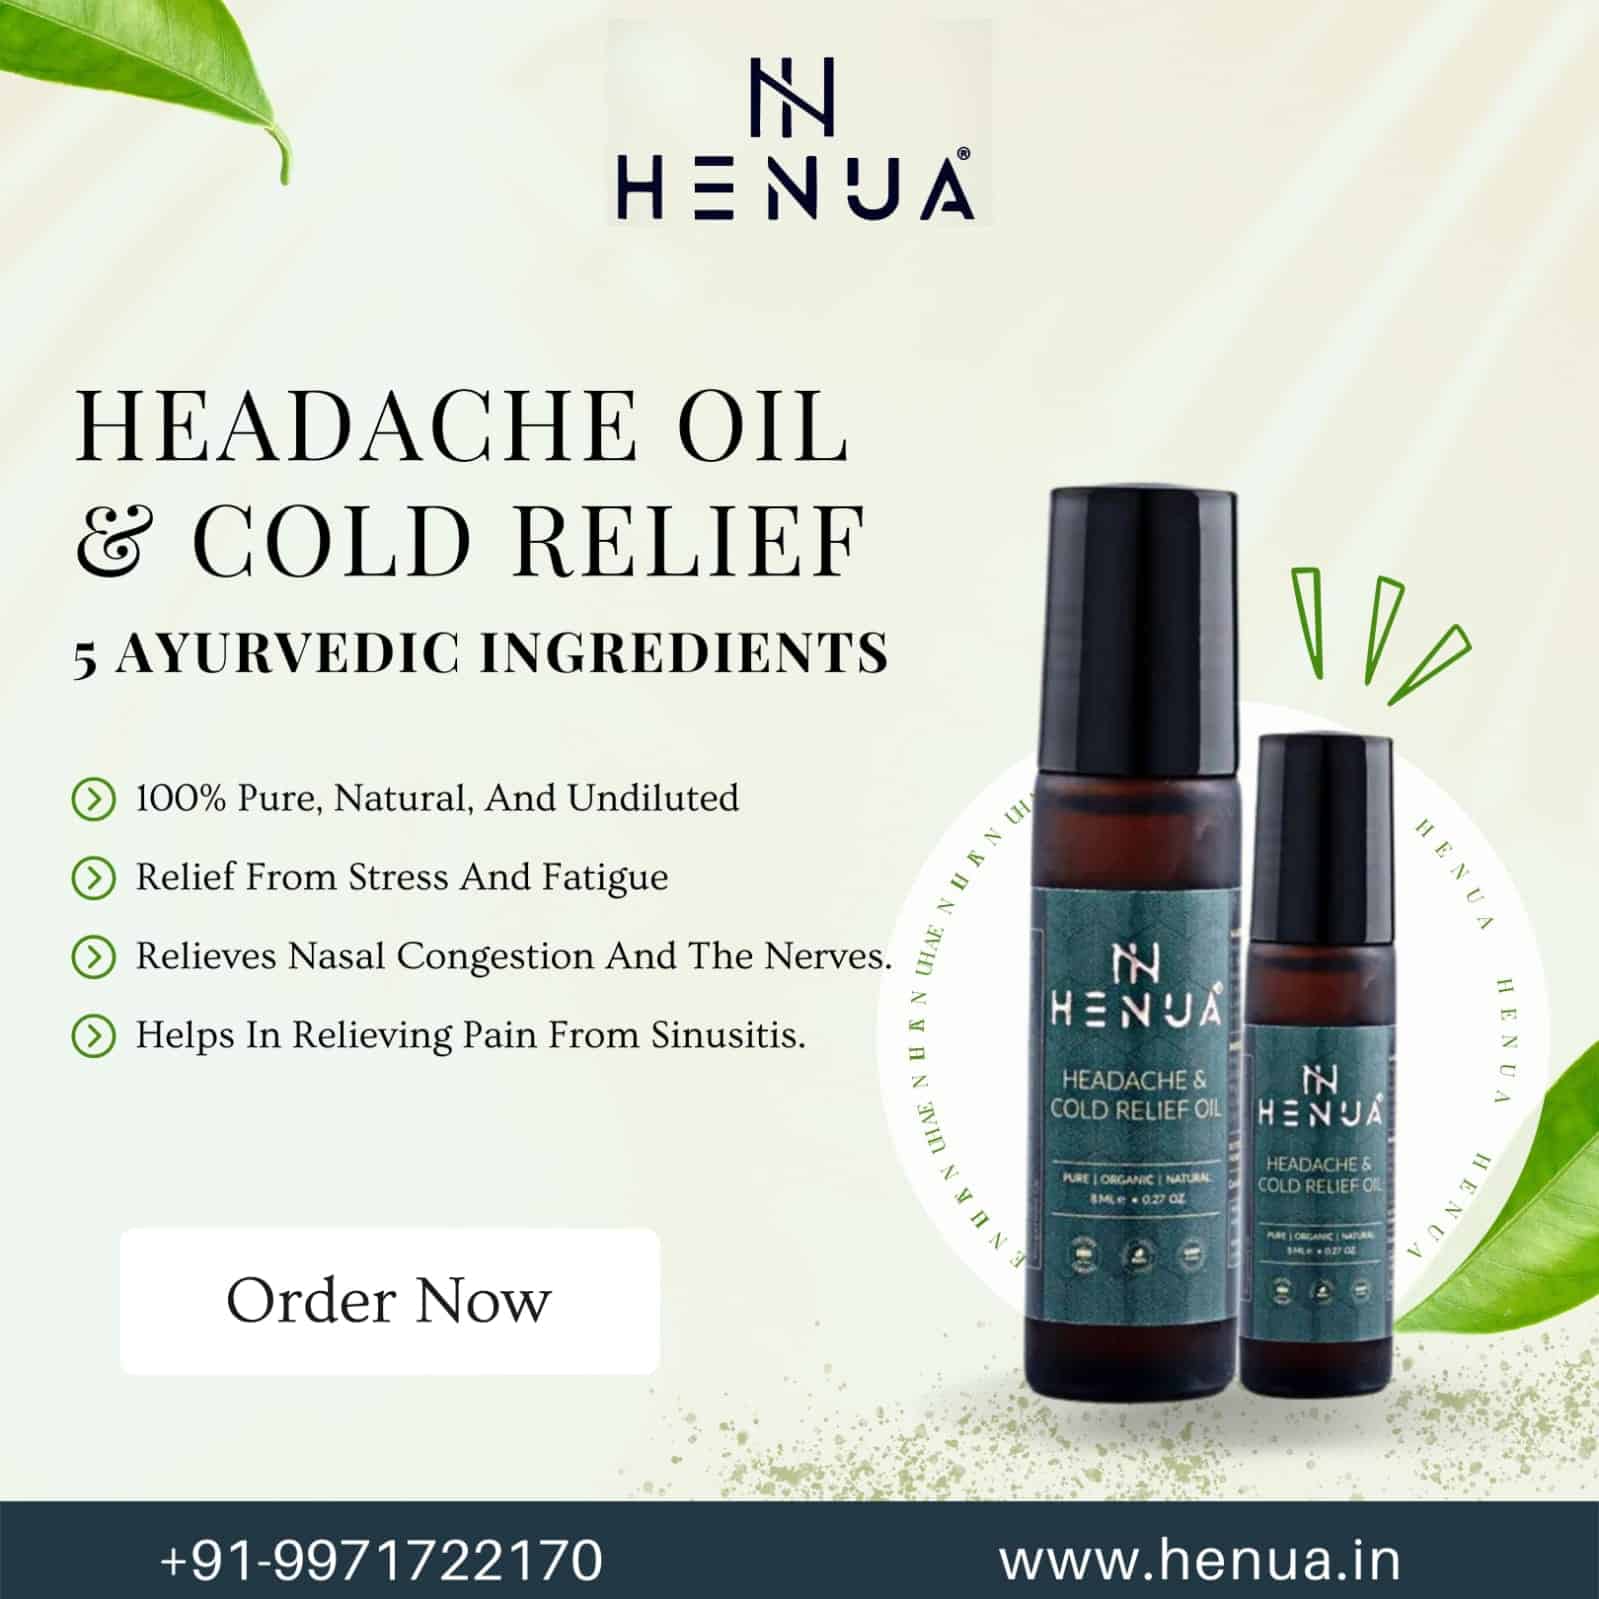 Henua-Headache-Oil-And-Cold-Relief-Now-Available-Online